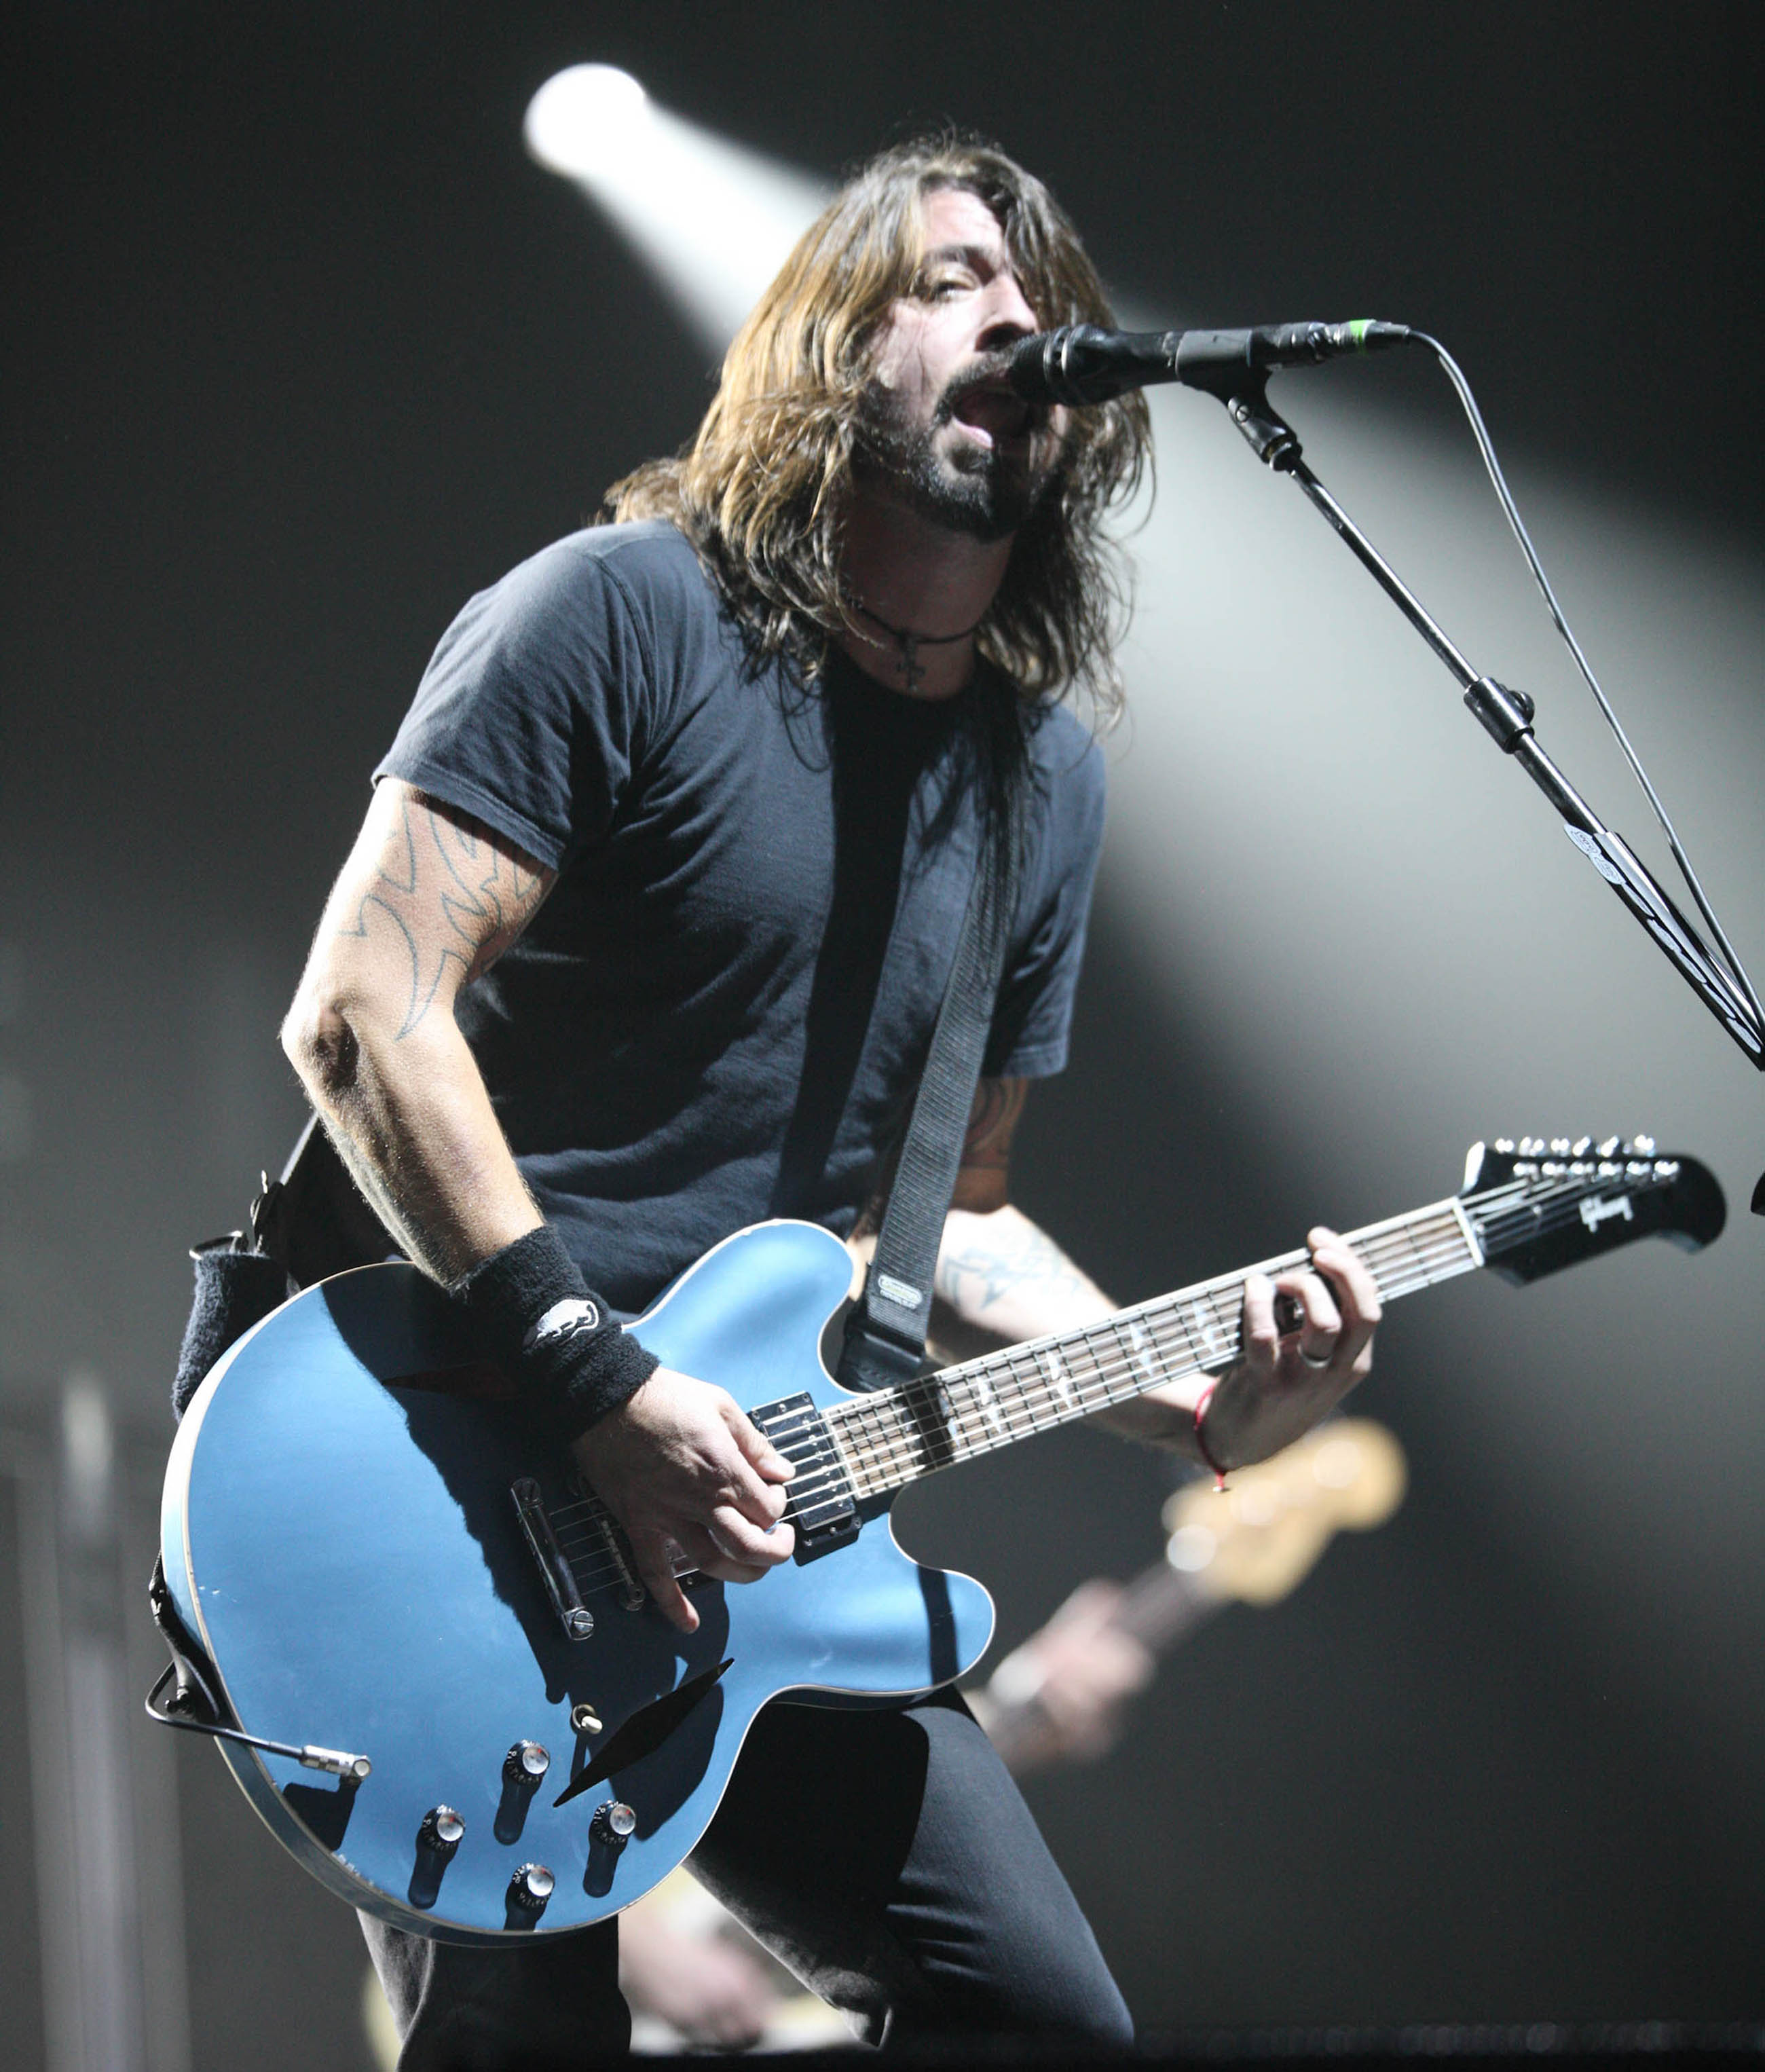 Spelning, Rockband, Musik, Rock, Dave Grohl, Band, Foo Fighters